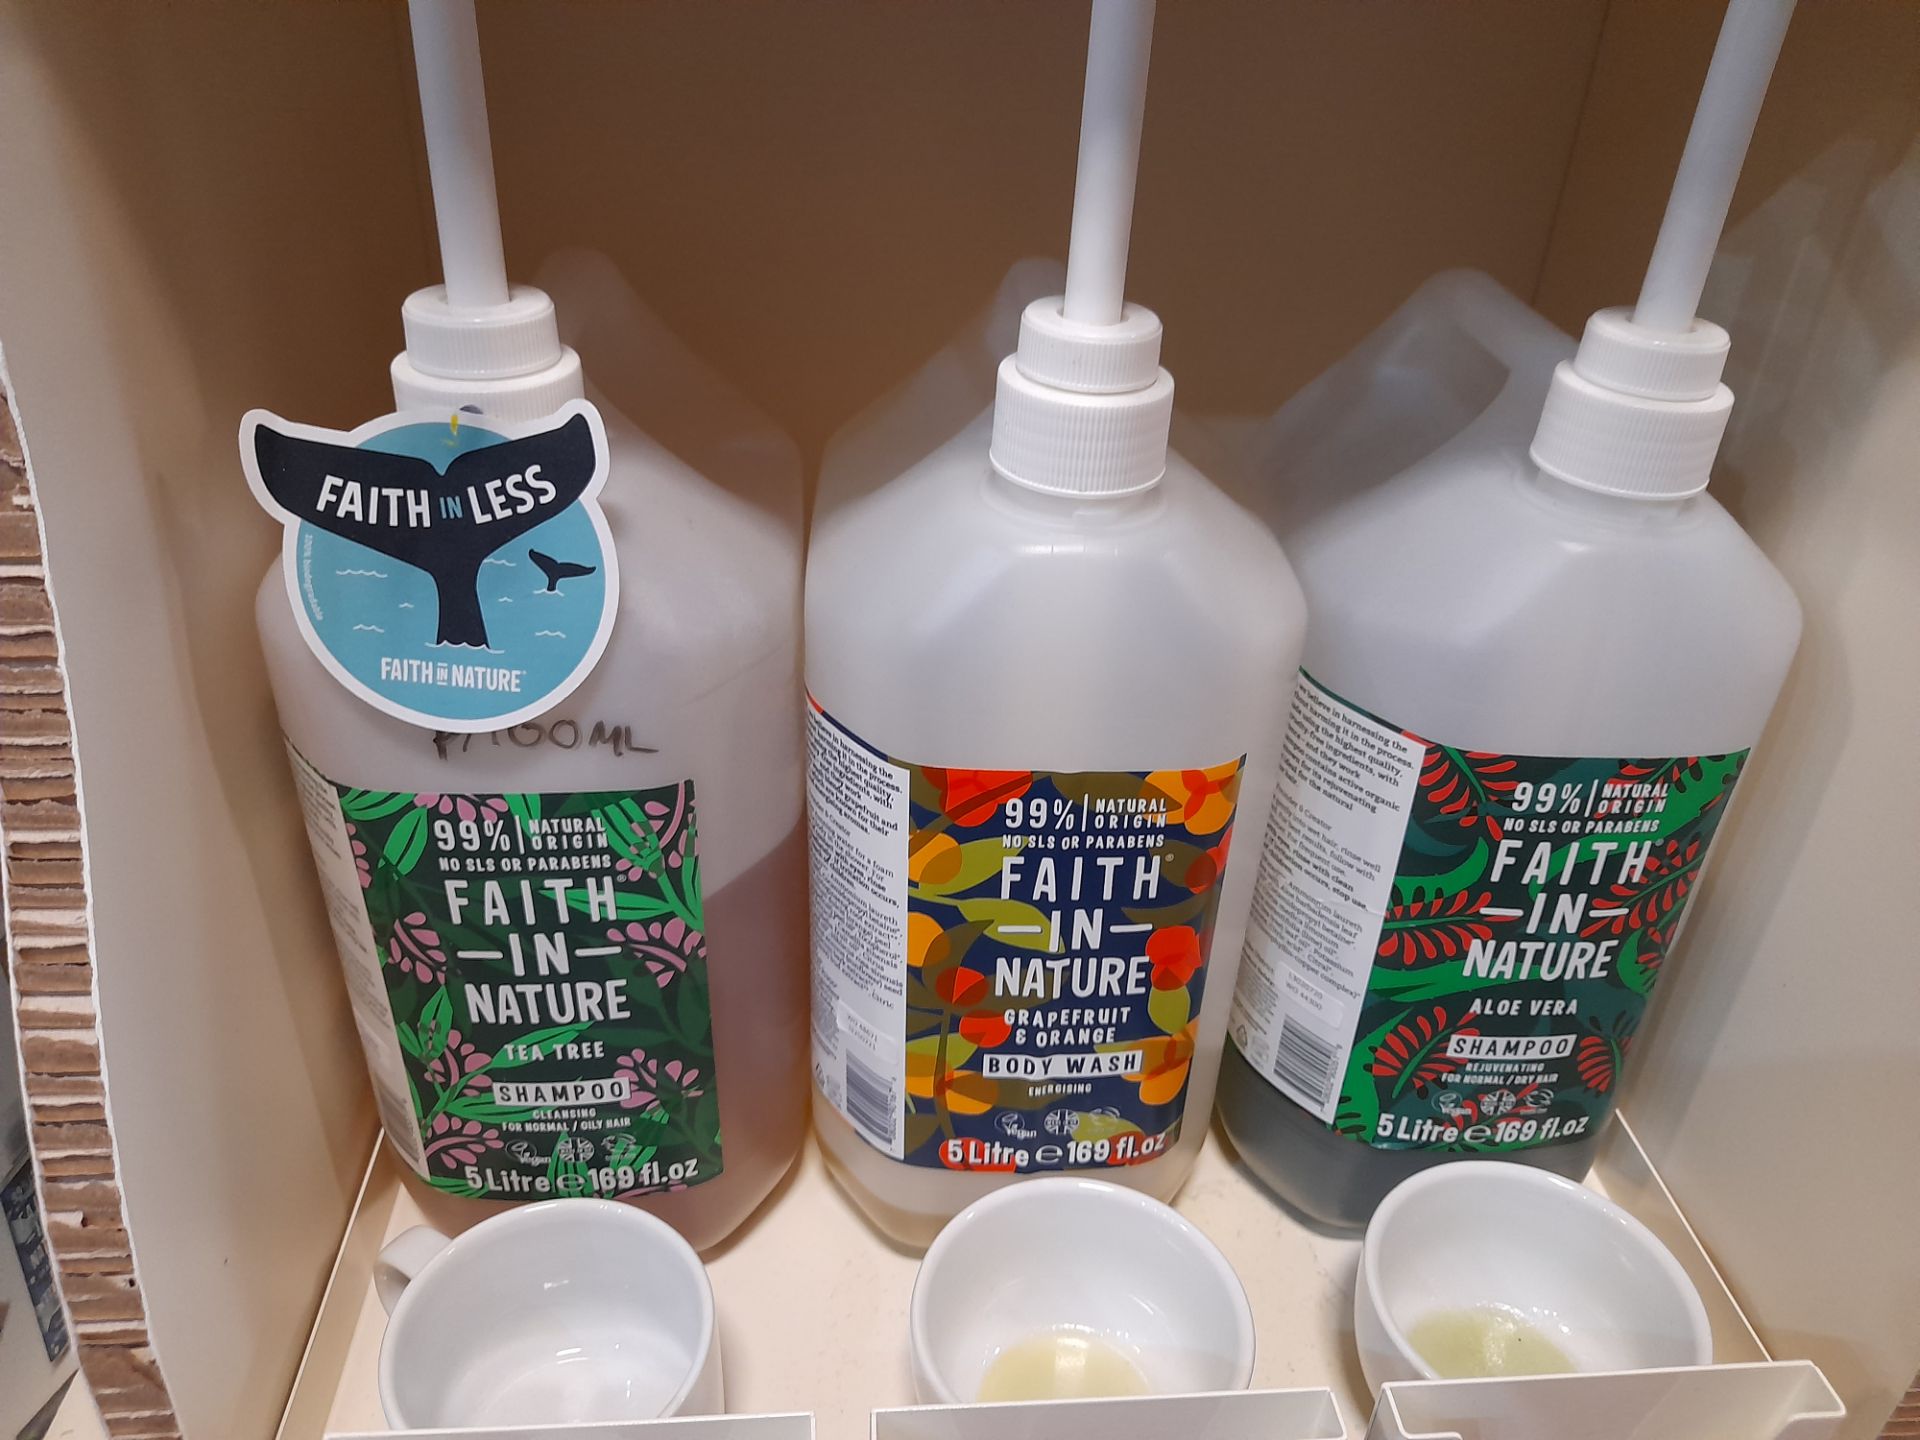 2x Faith in Nature Display Stands with 19x part opened Faith in Nature shampoos, conditioners, - Image 7 of 7